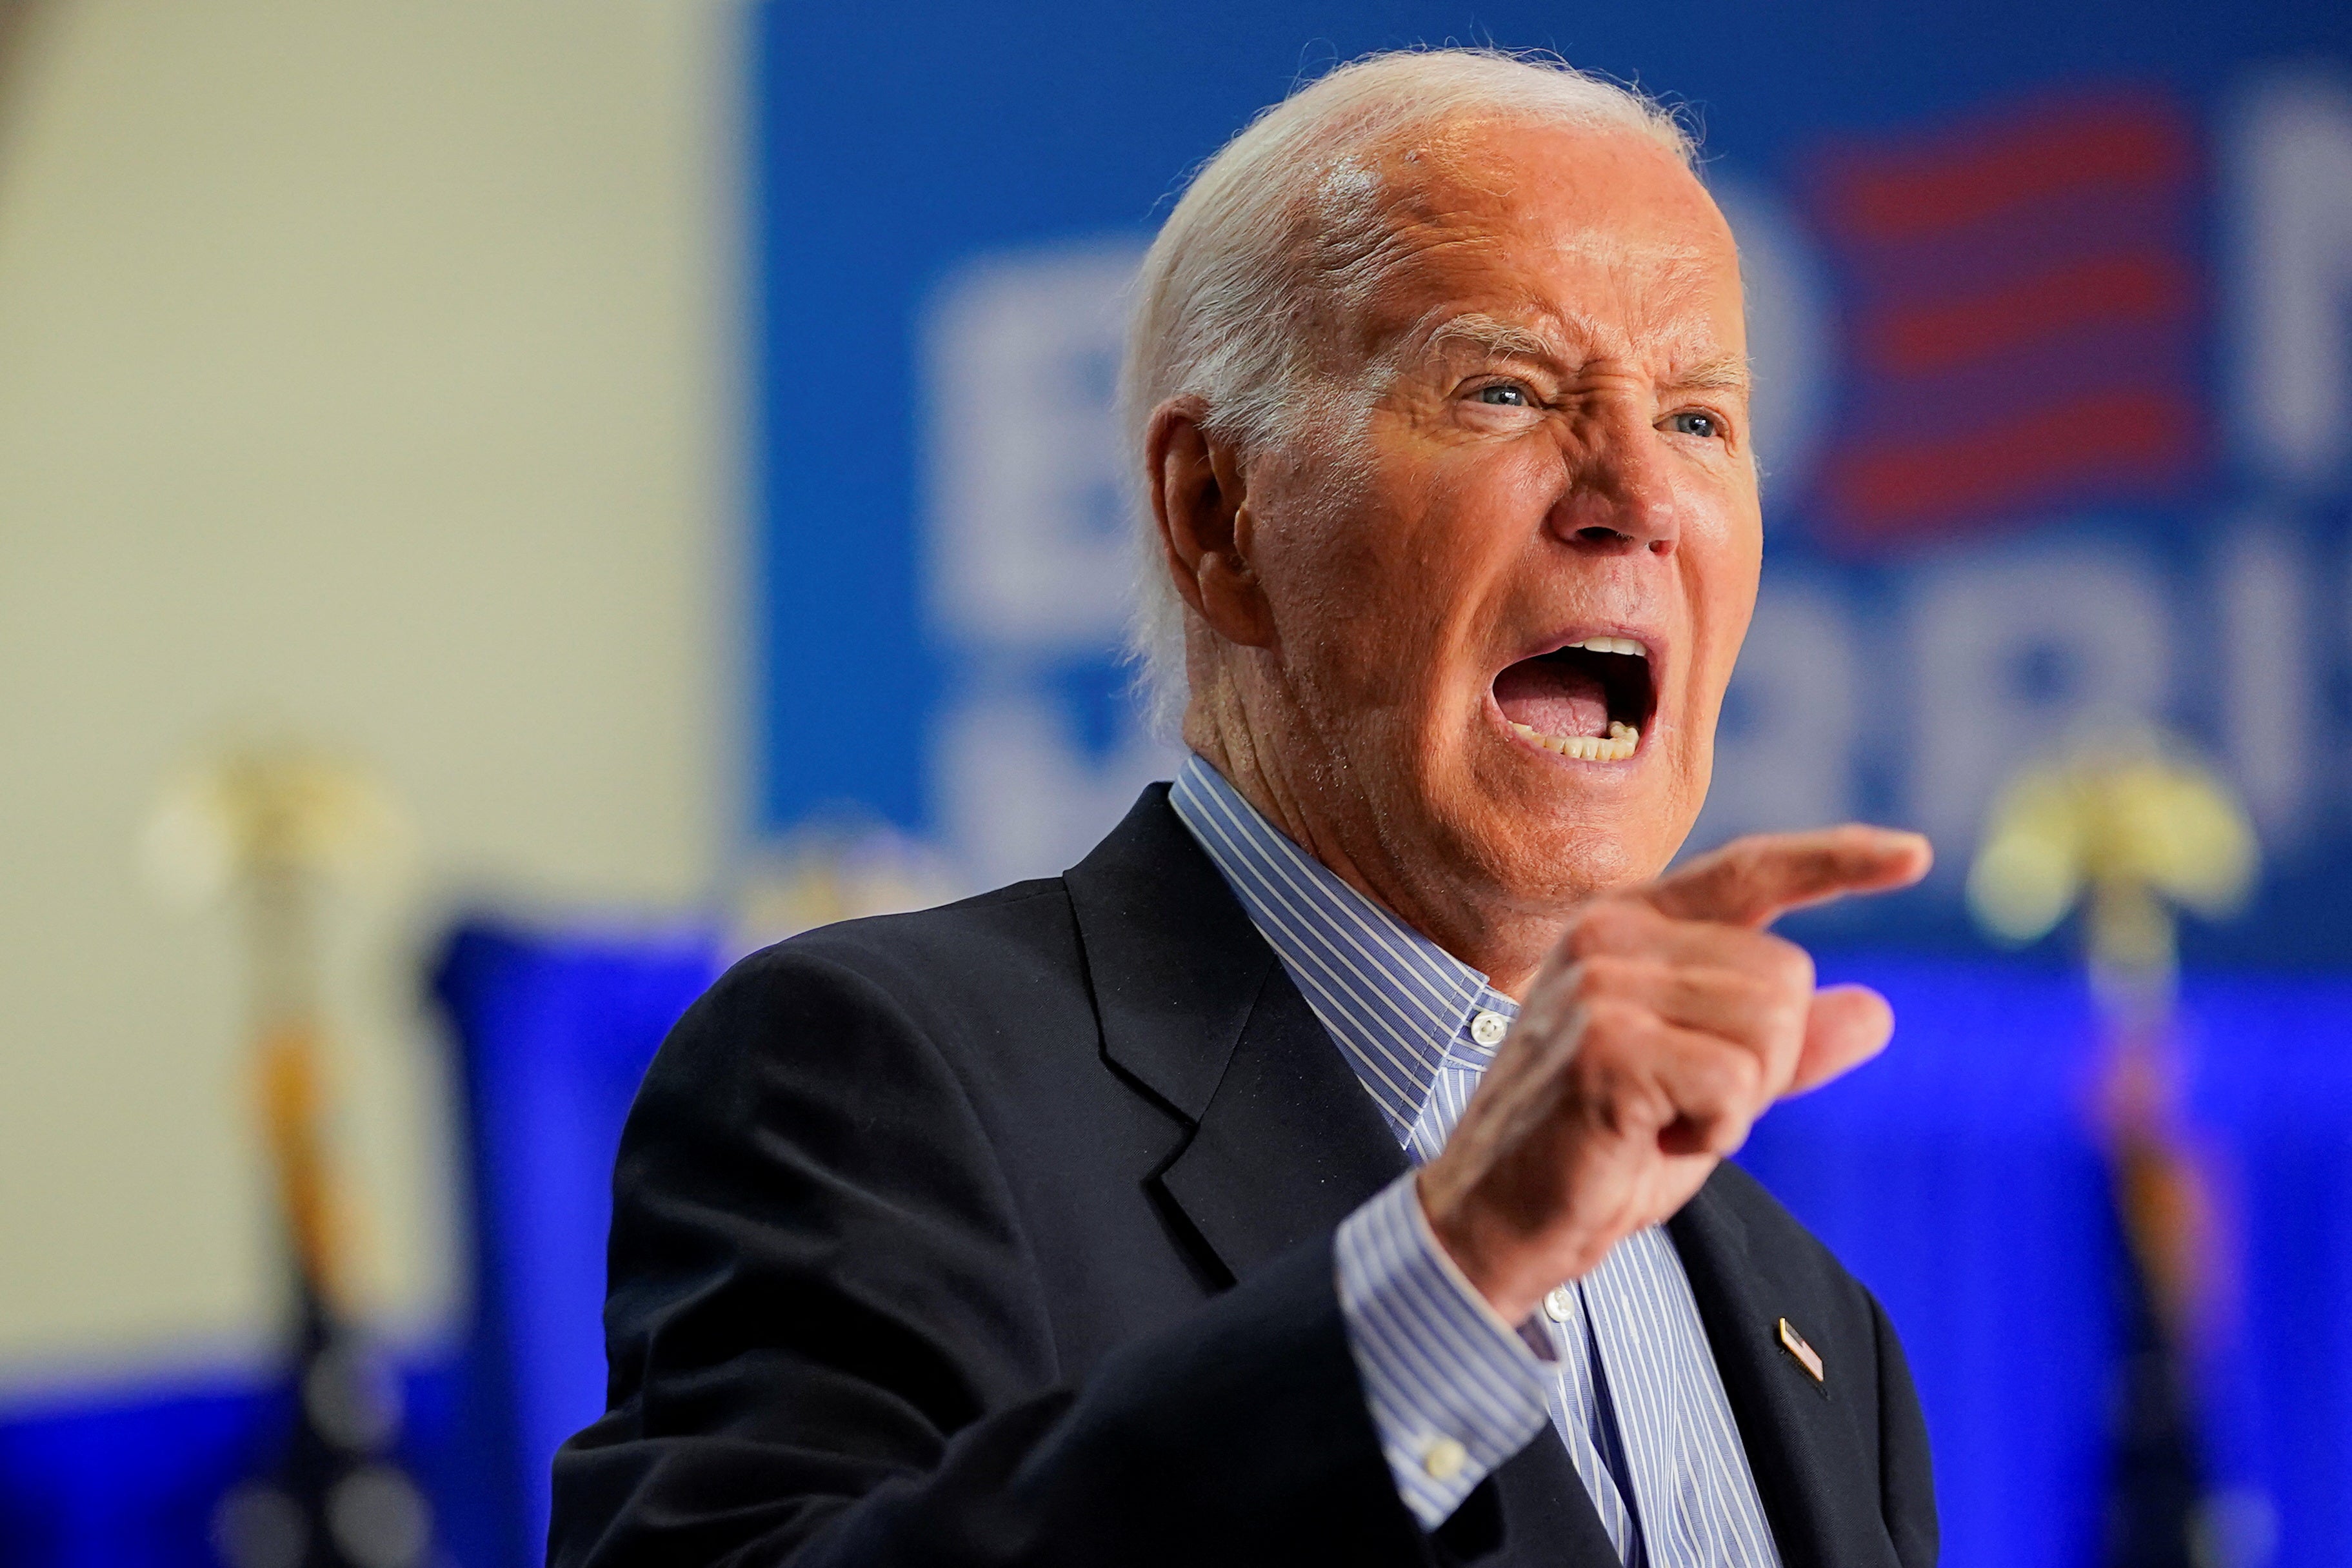 Joe Biden has continued to aggressively stake his claim for the Democratic ticket despite calls for him to step aside